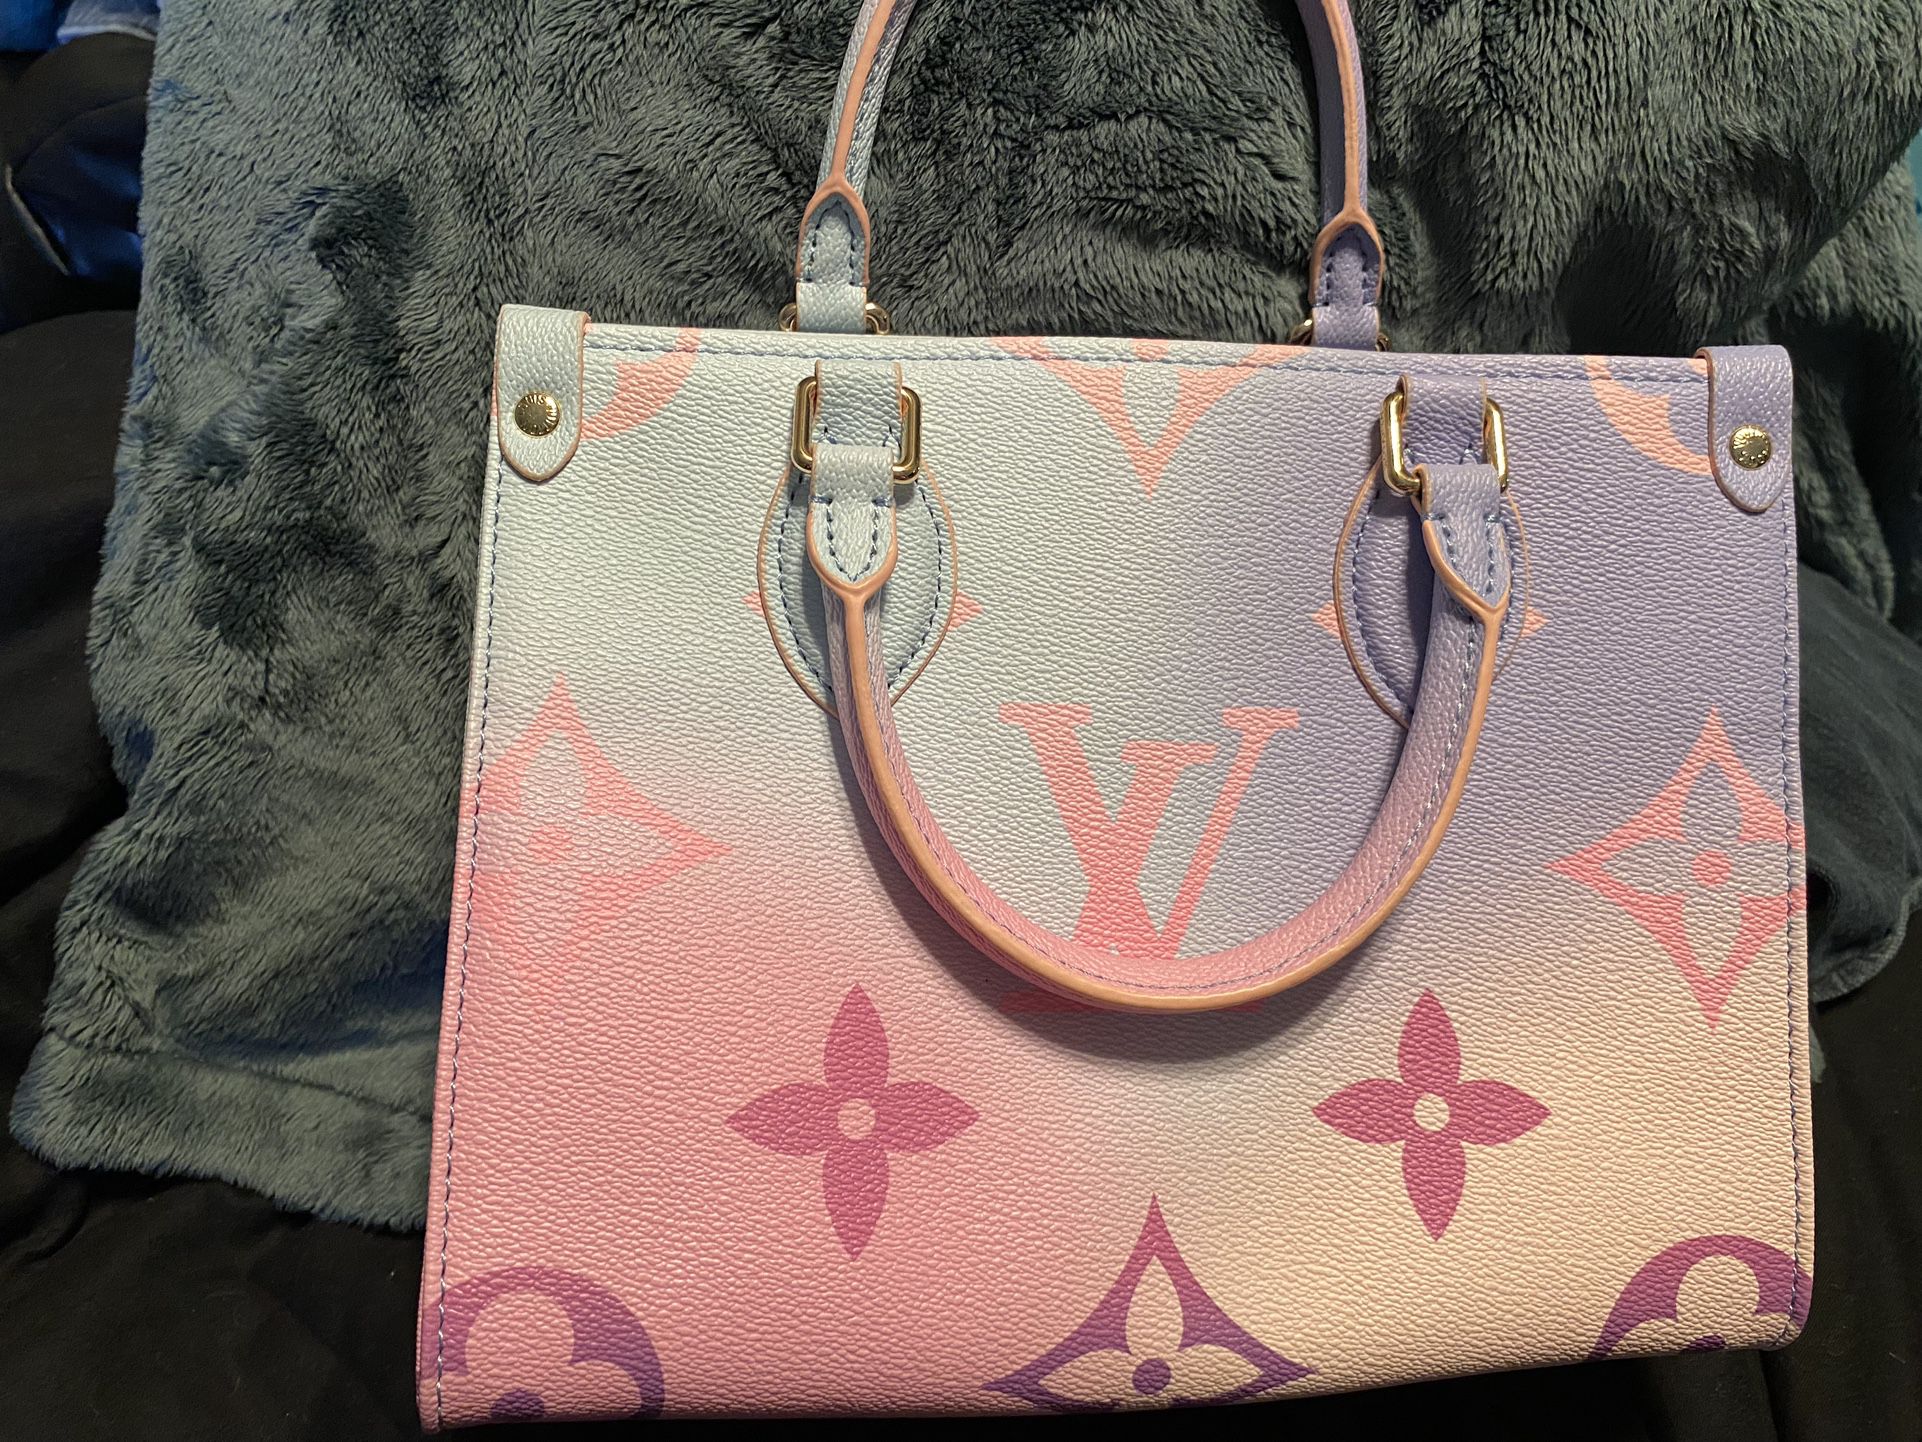 Louis Vuitton On the Go PM Sunrise Pastel for Sale in Victorville, CA -  OfferUp